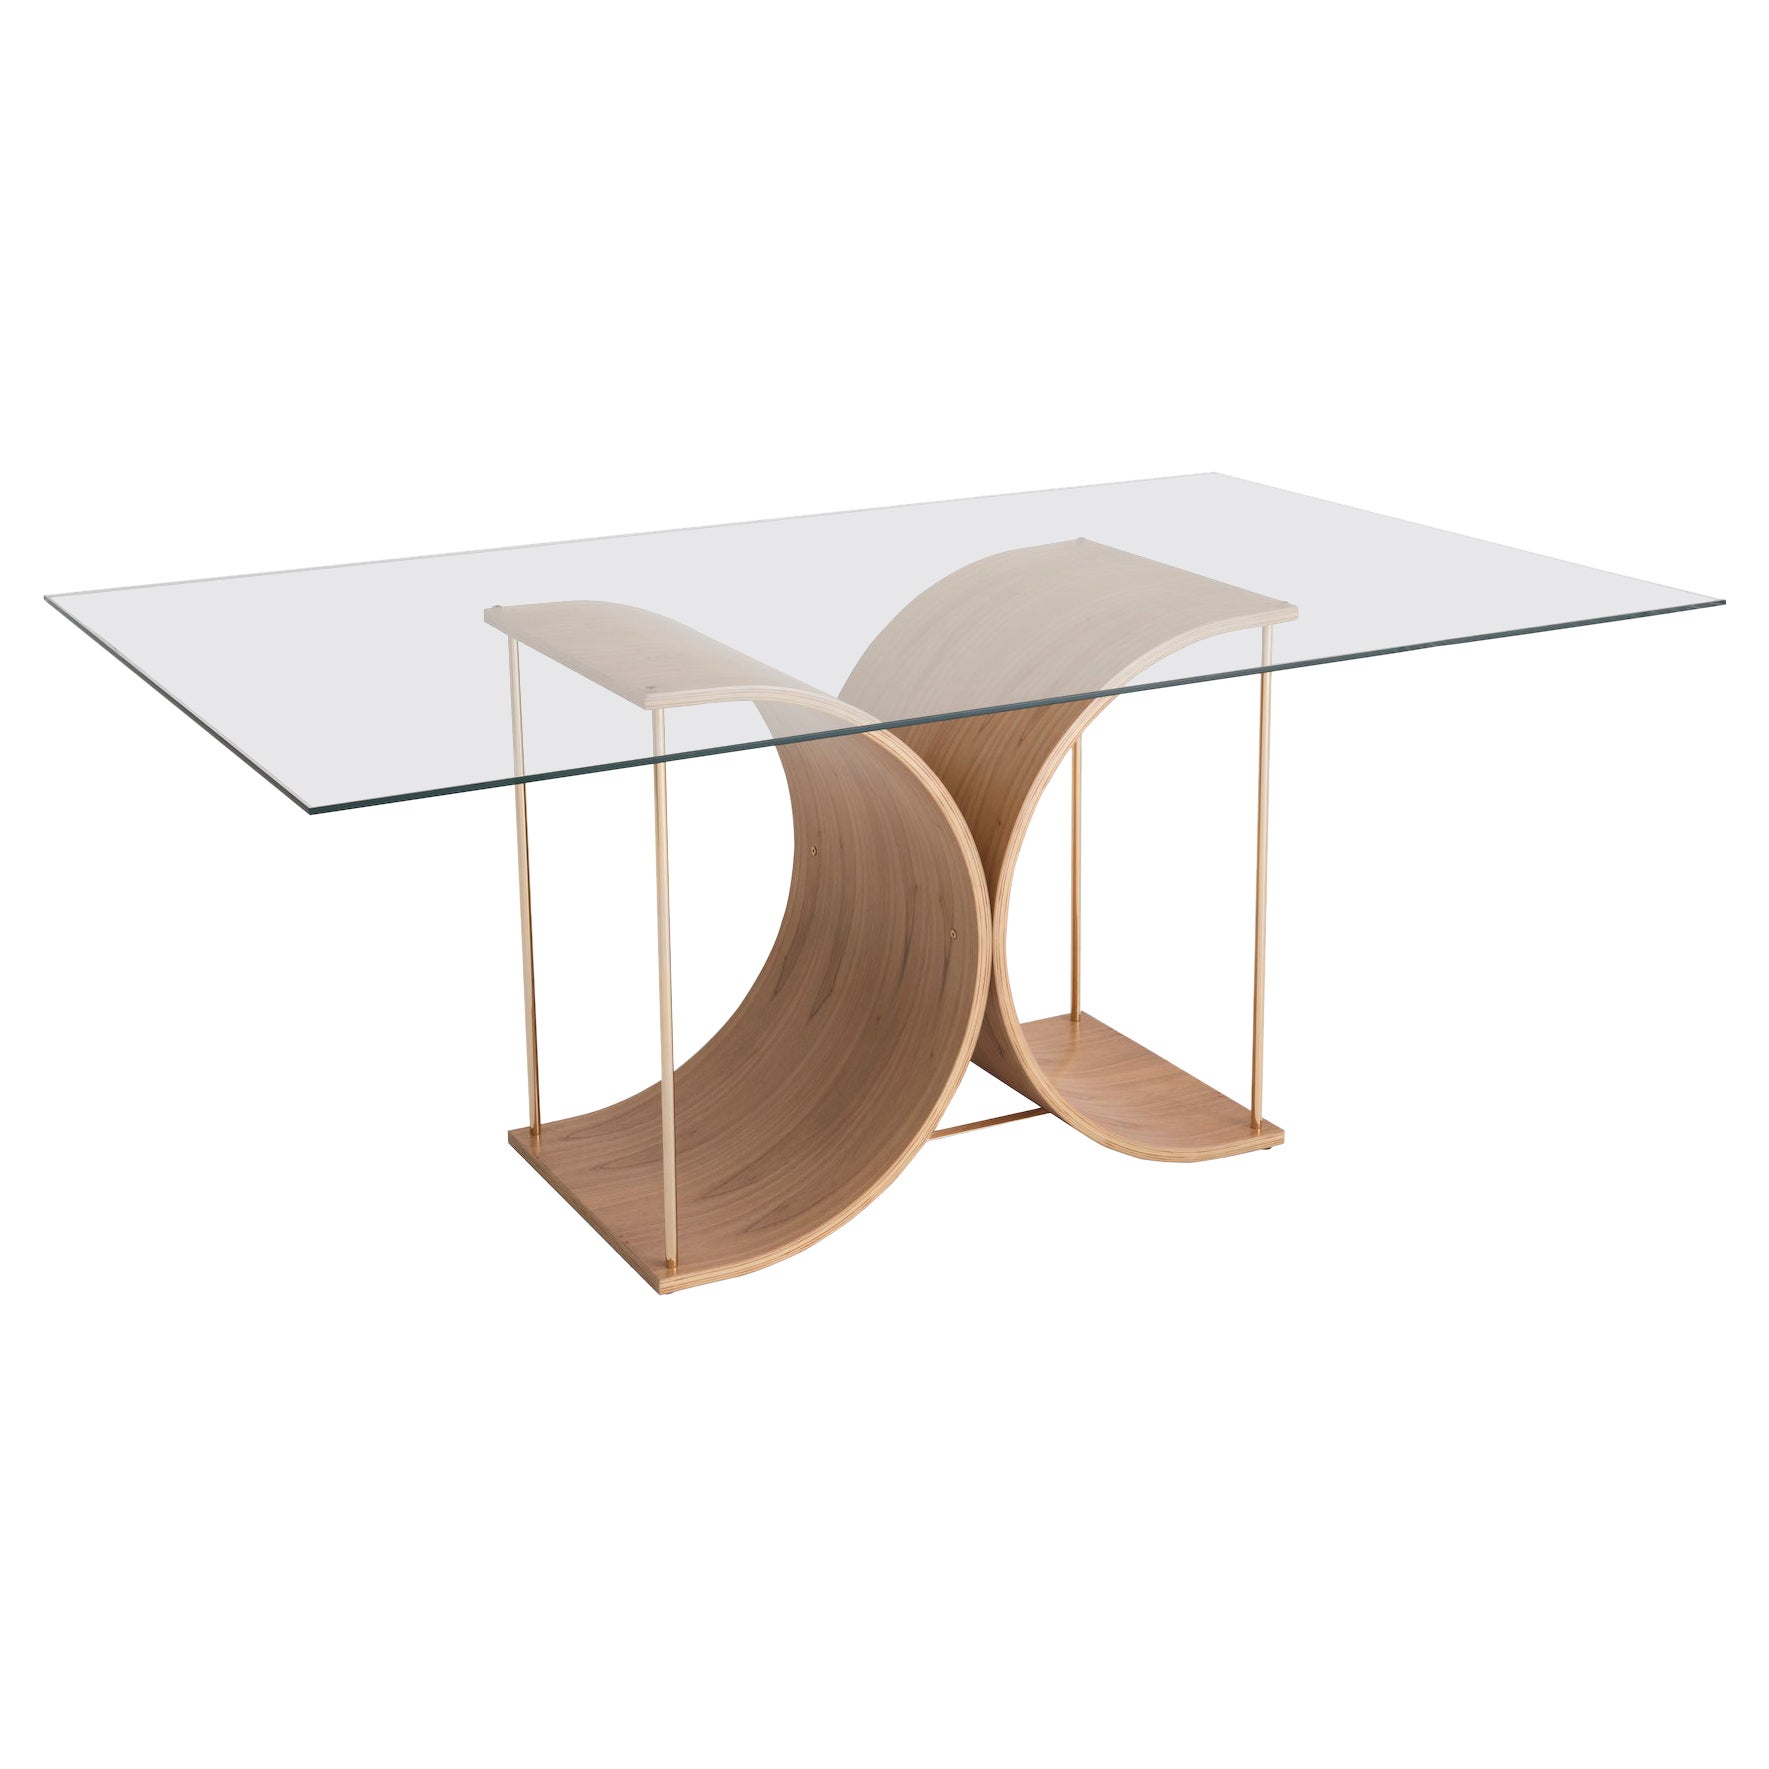 "Regia" Base of Dining Table in Curved Cinnamon Natural Wood Multi-laminate  For Sale